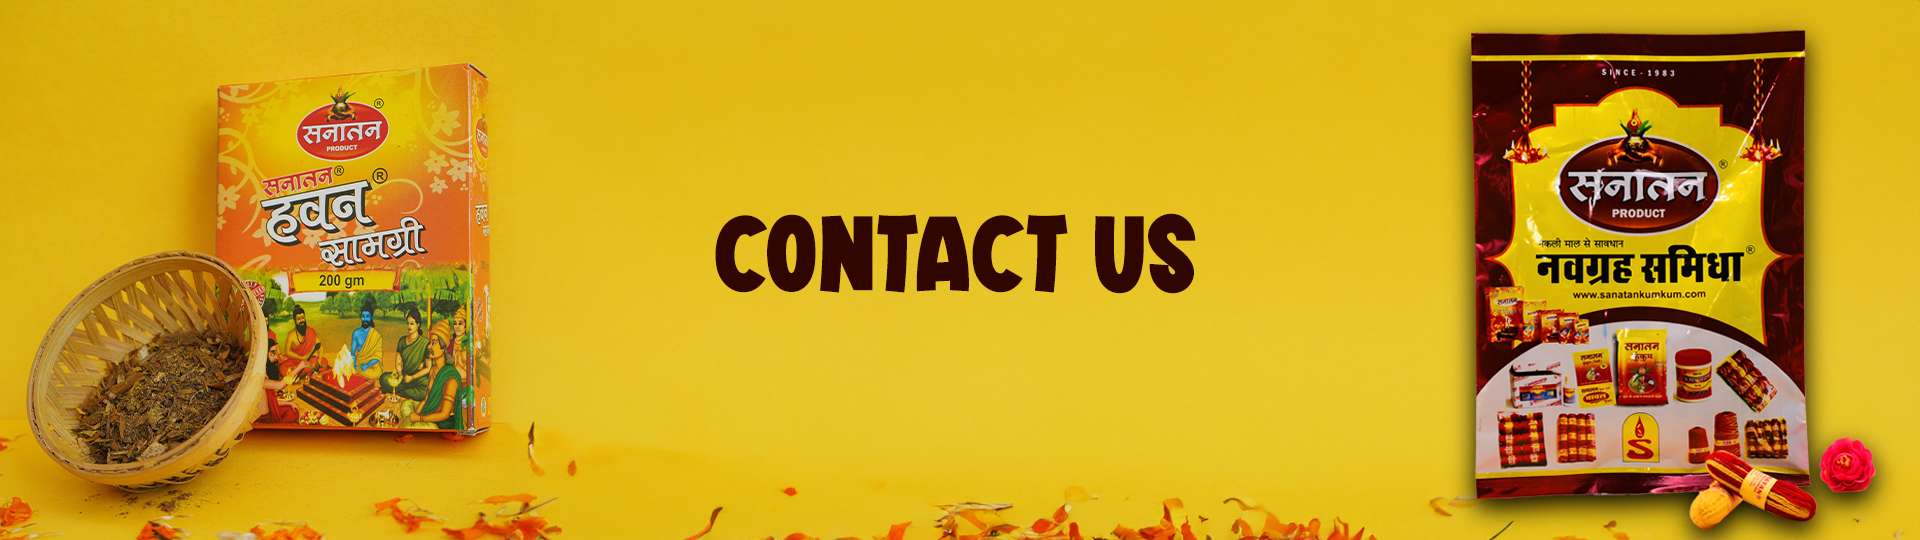 Contact-us-Banner (1)